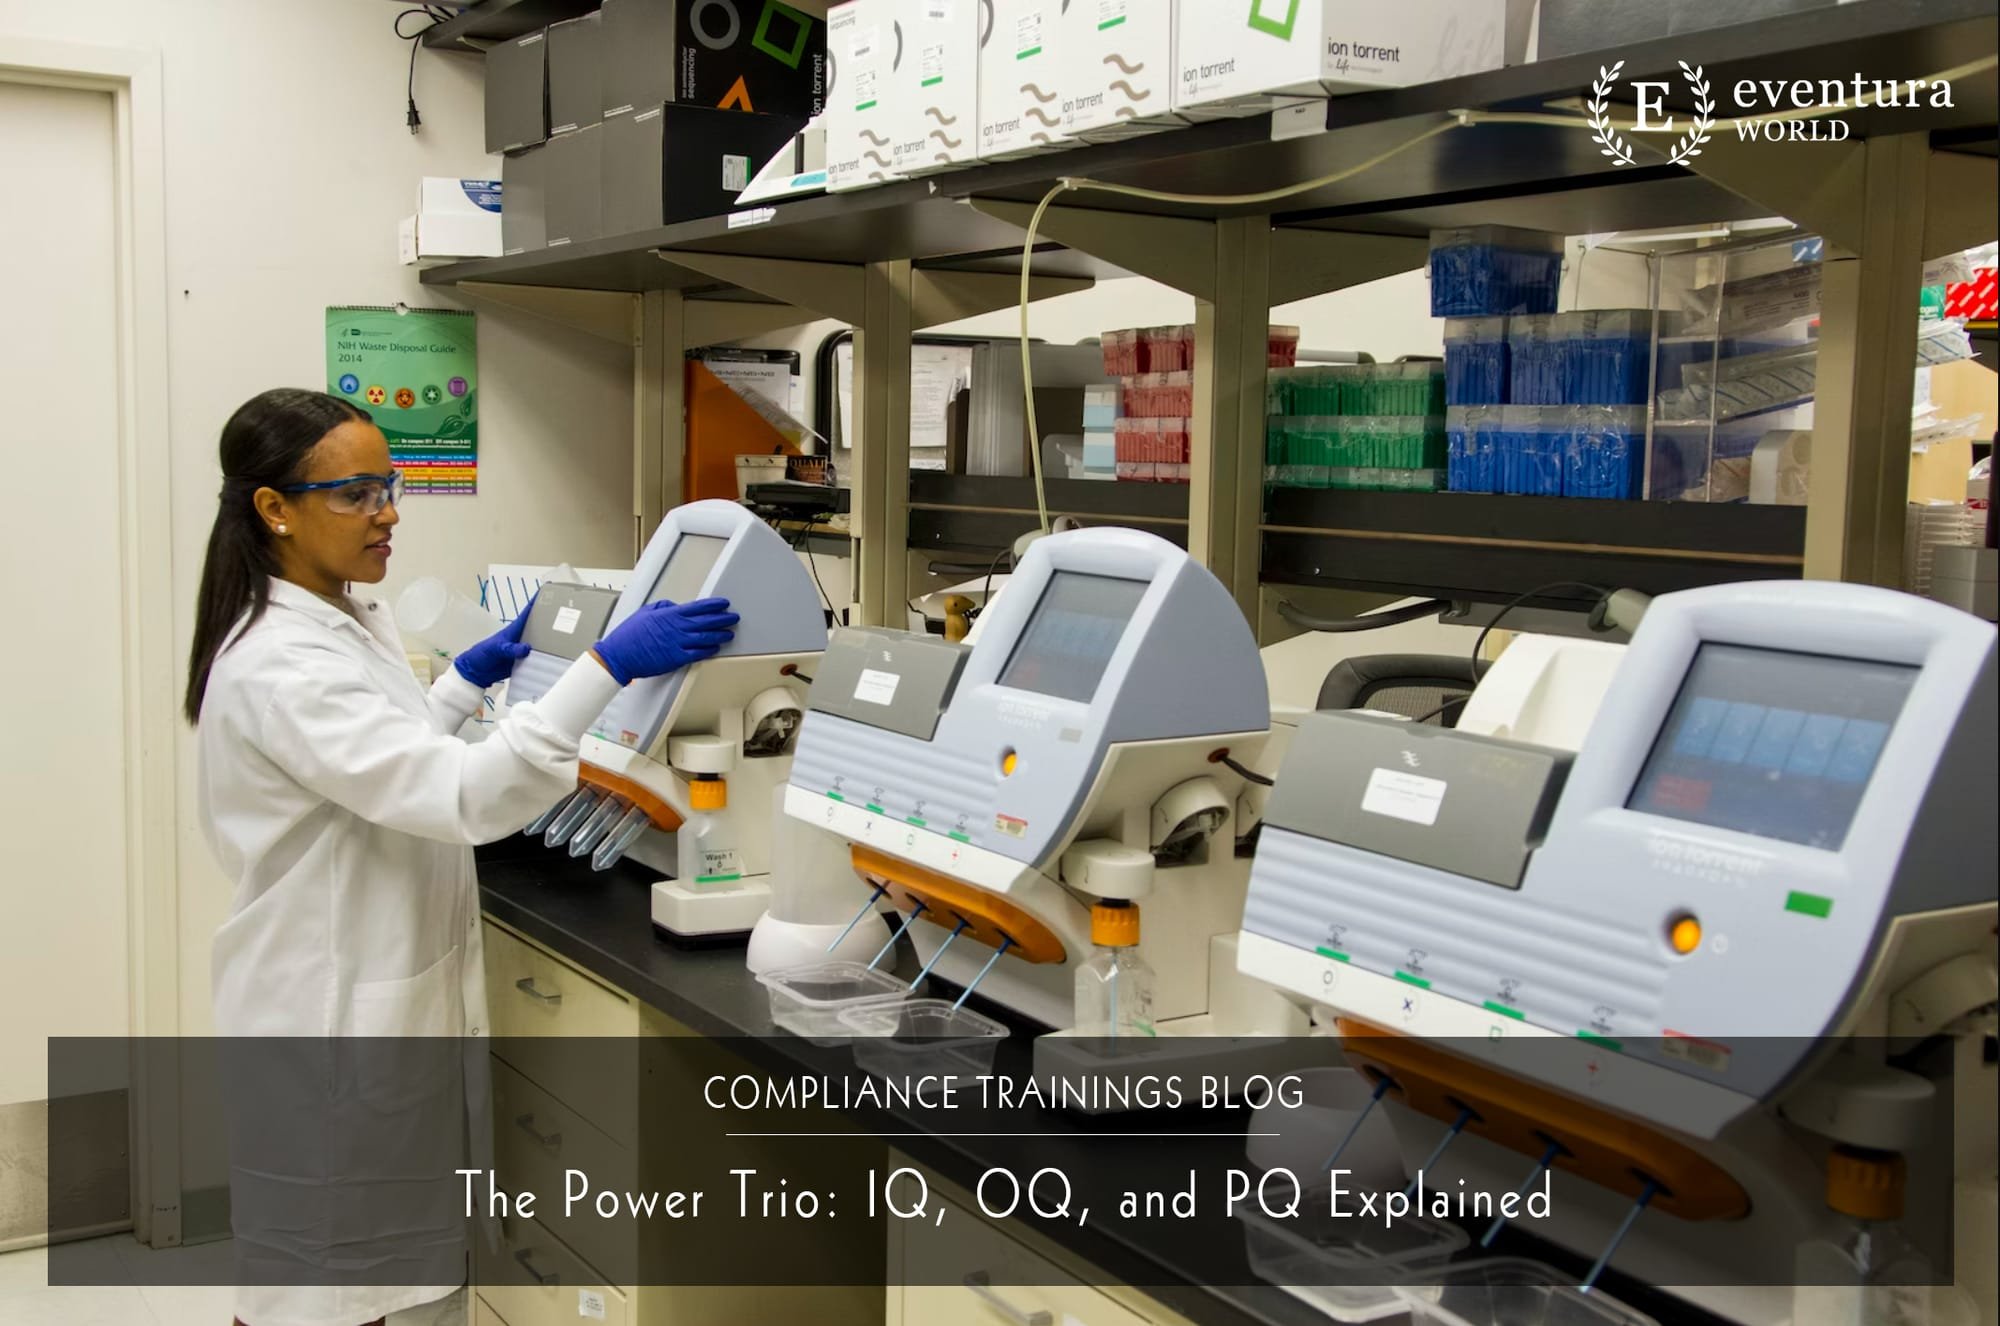 The Power Trio: IQ, OQ, and PQ Explained